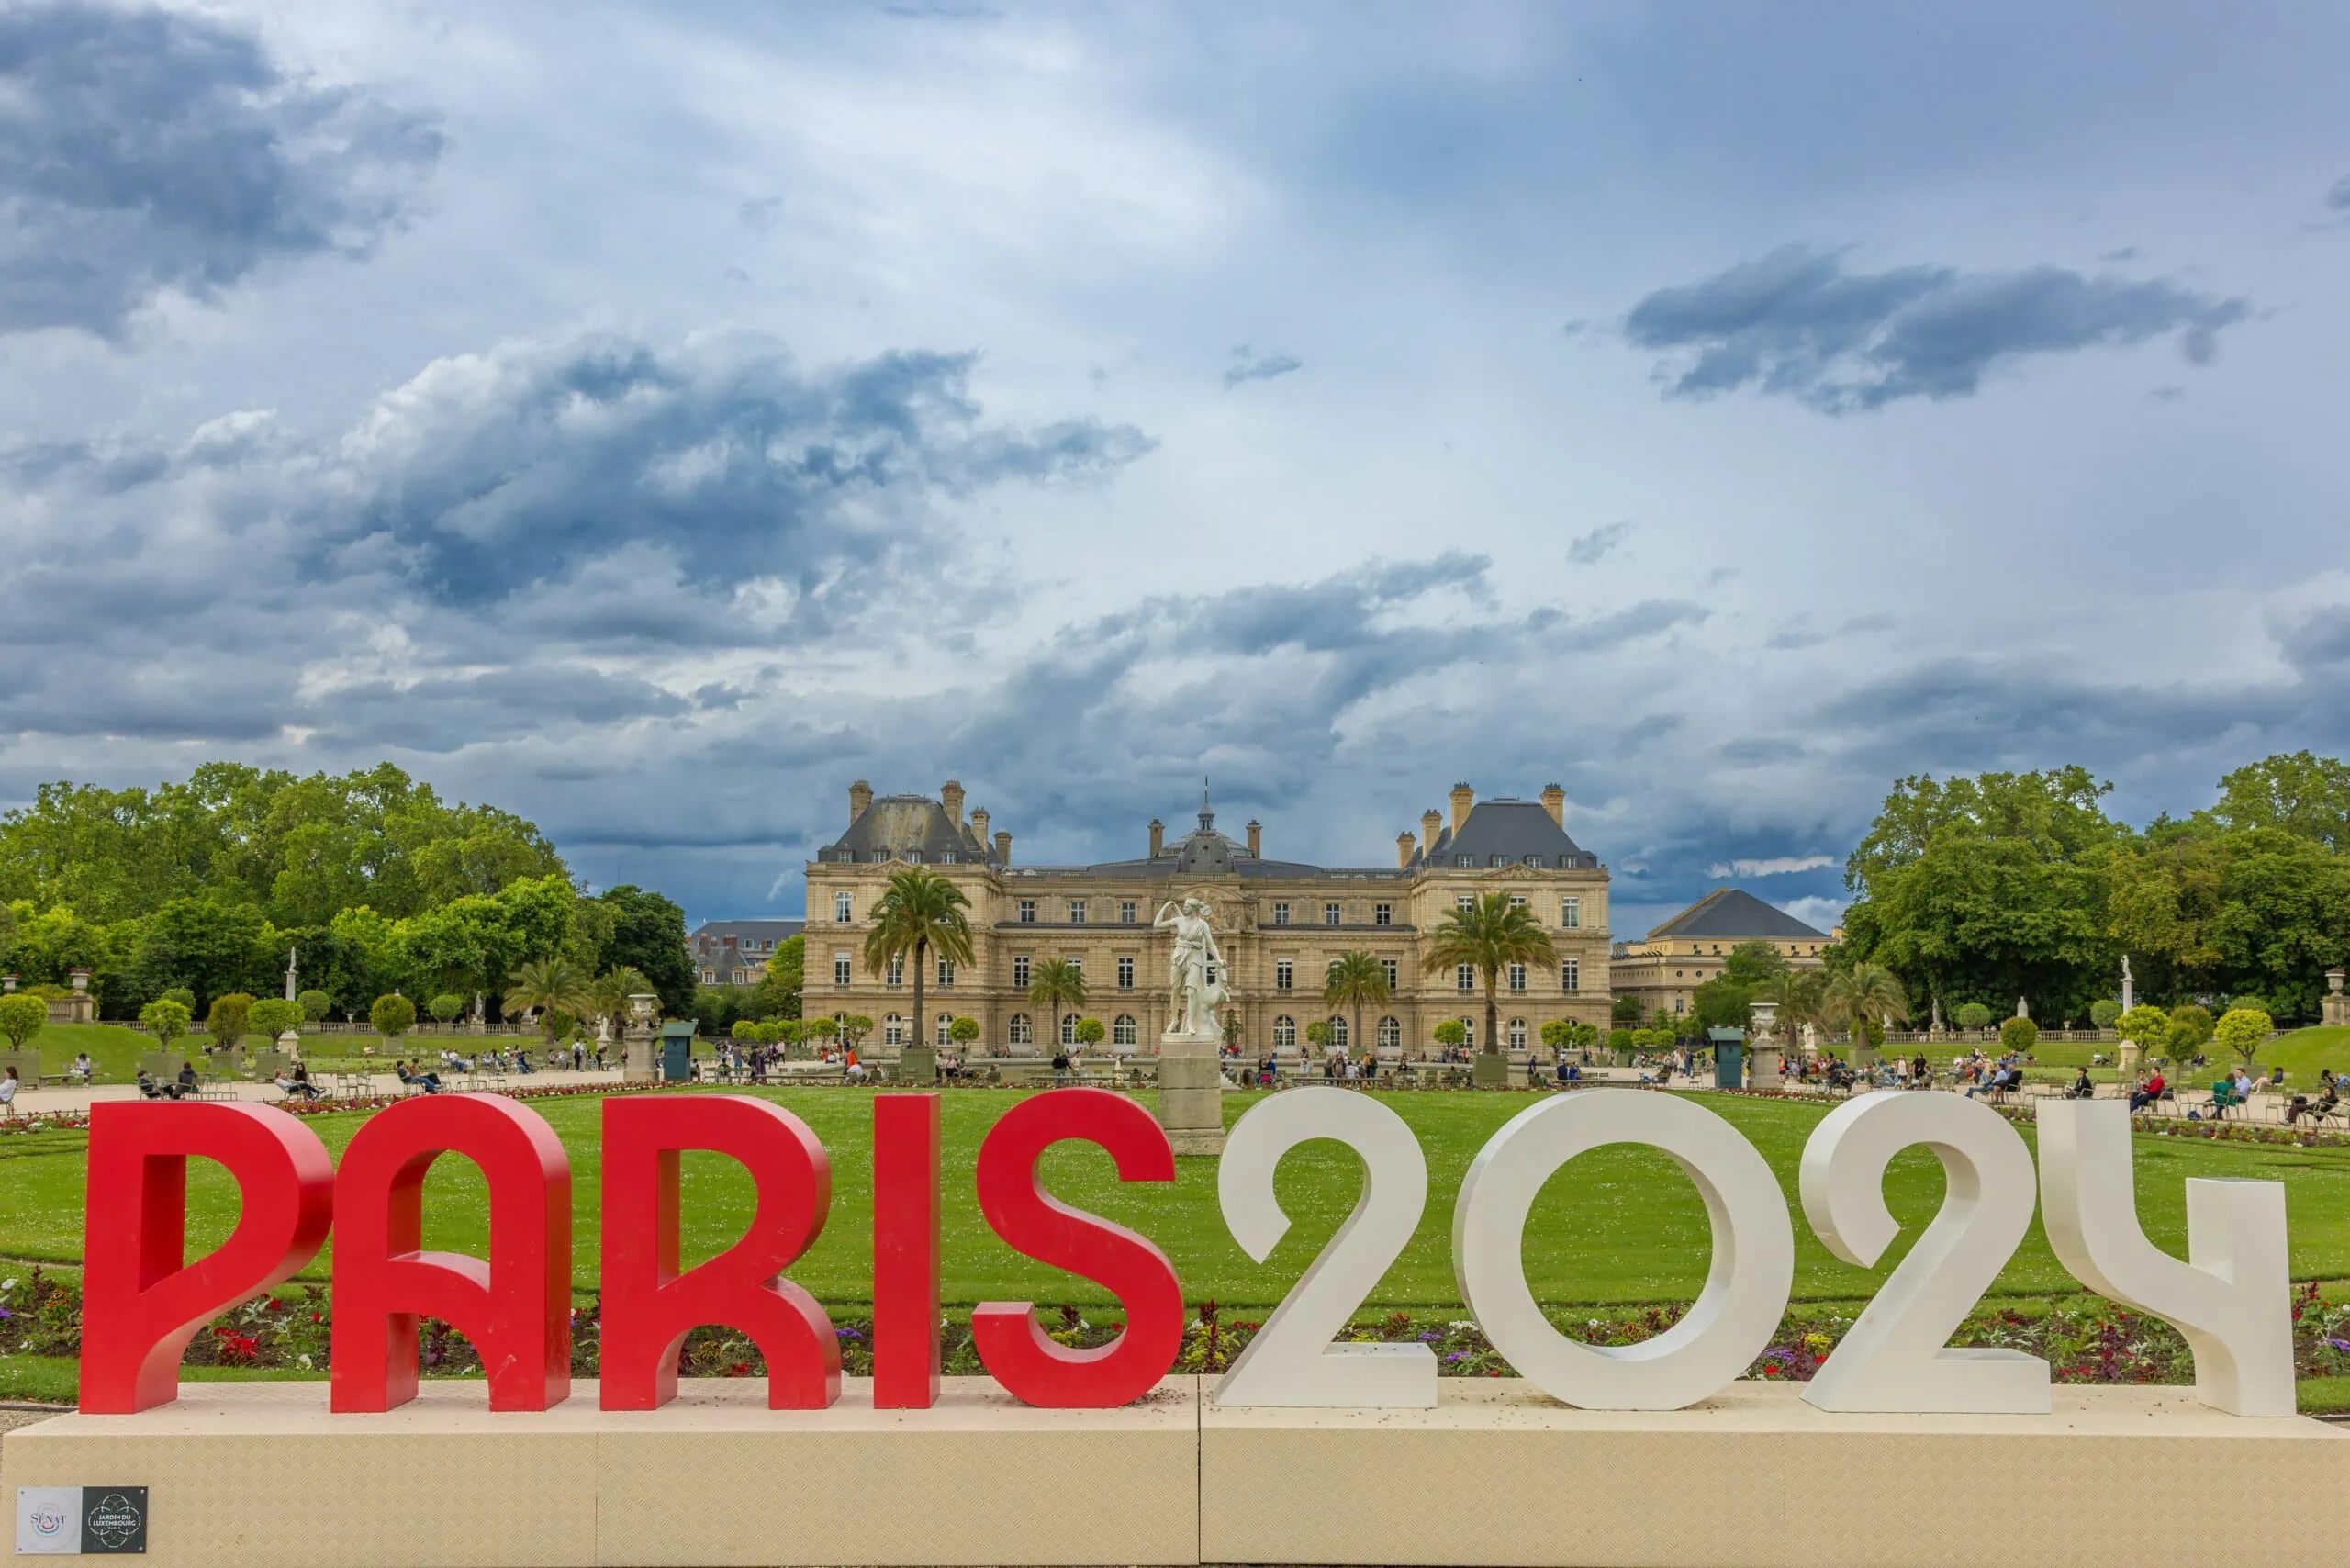 Olympic athletes rely on excellent vision for peak performance at the Paris 2024 Summer Games